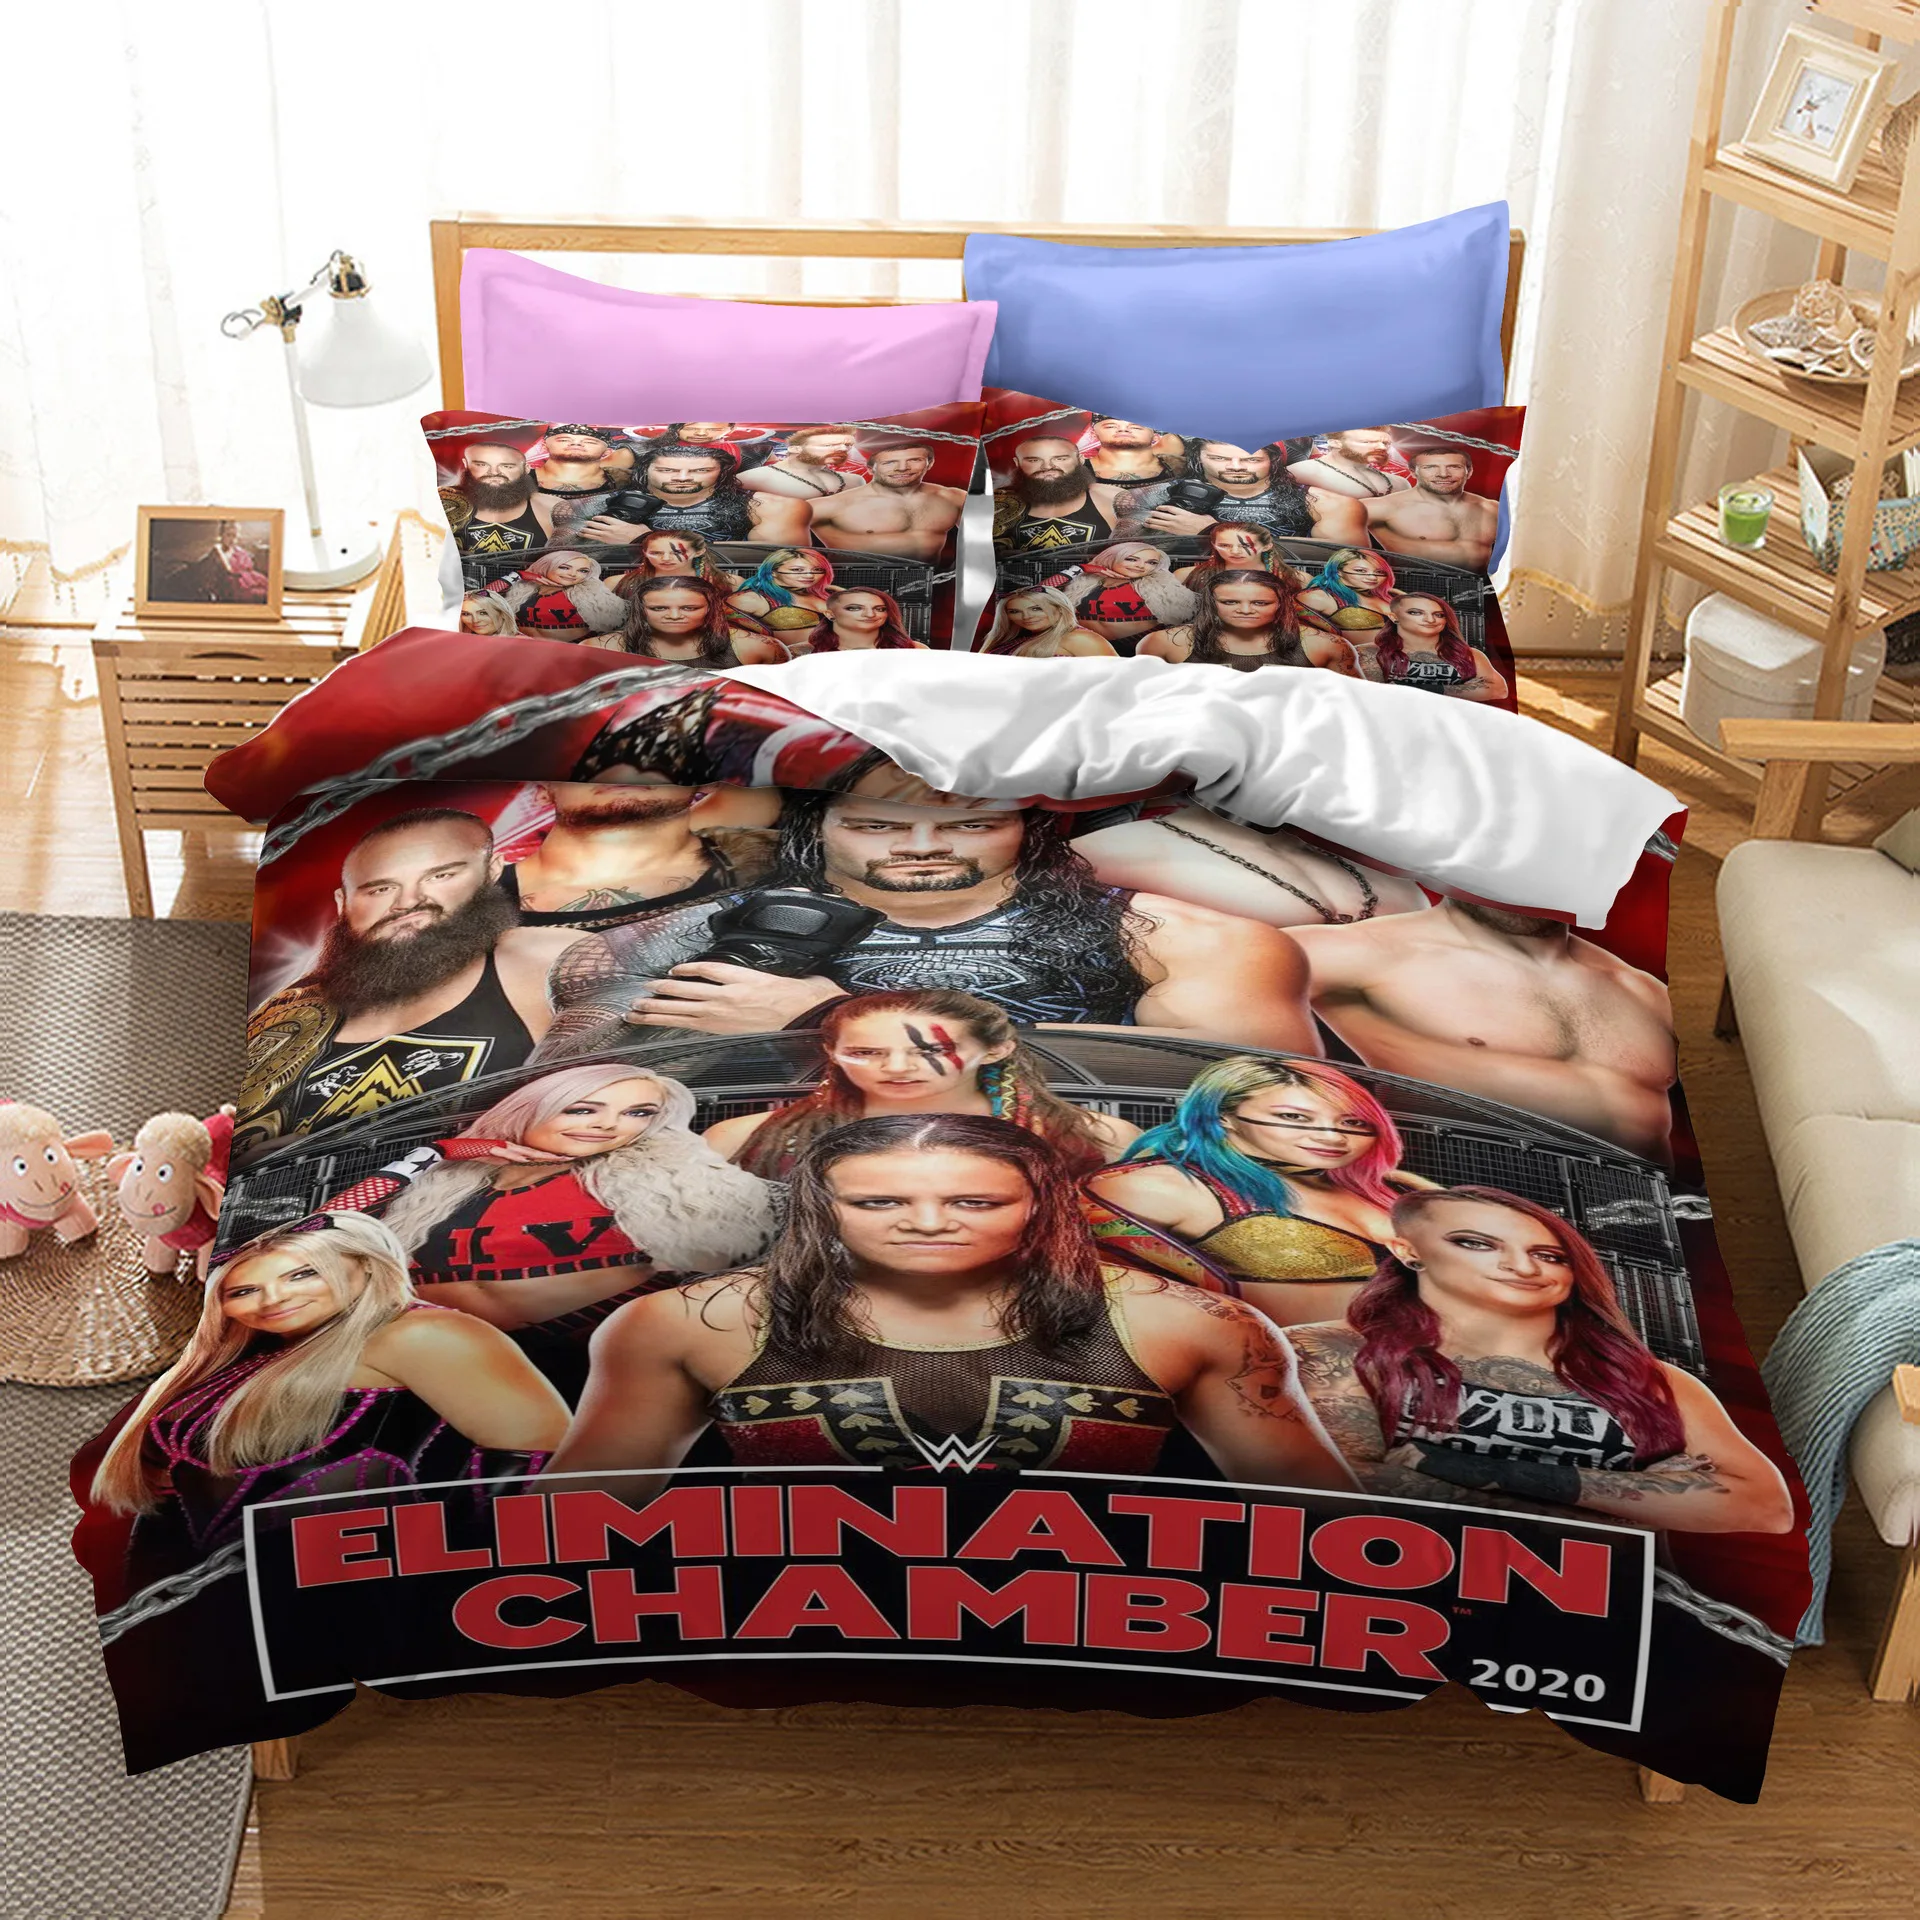 

Wrestling Gladiators 3D Printed Bedding Set WWE Characters Duvet Cover King Queen Full Twin Size for Bedroom Decor